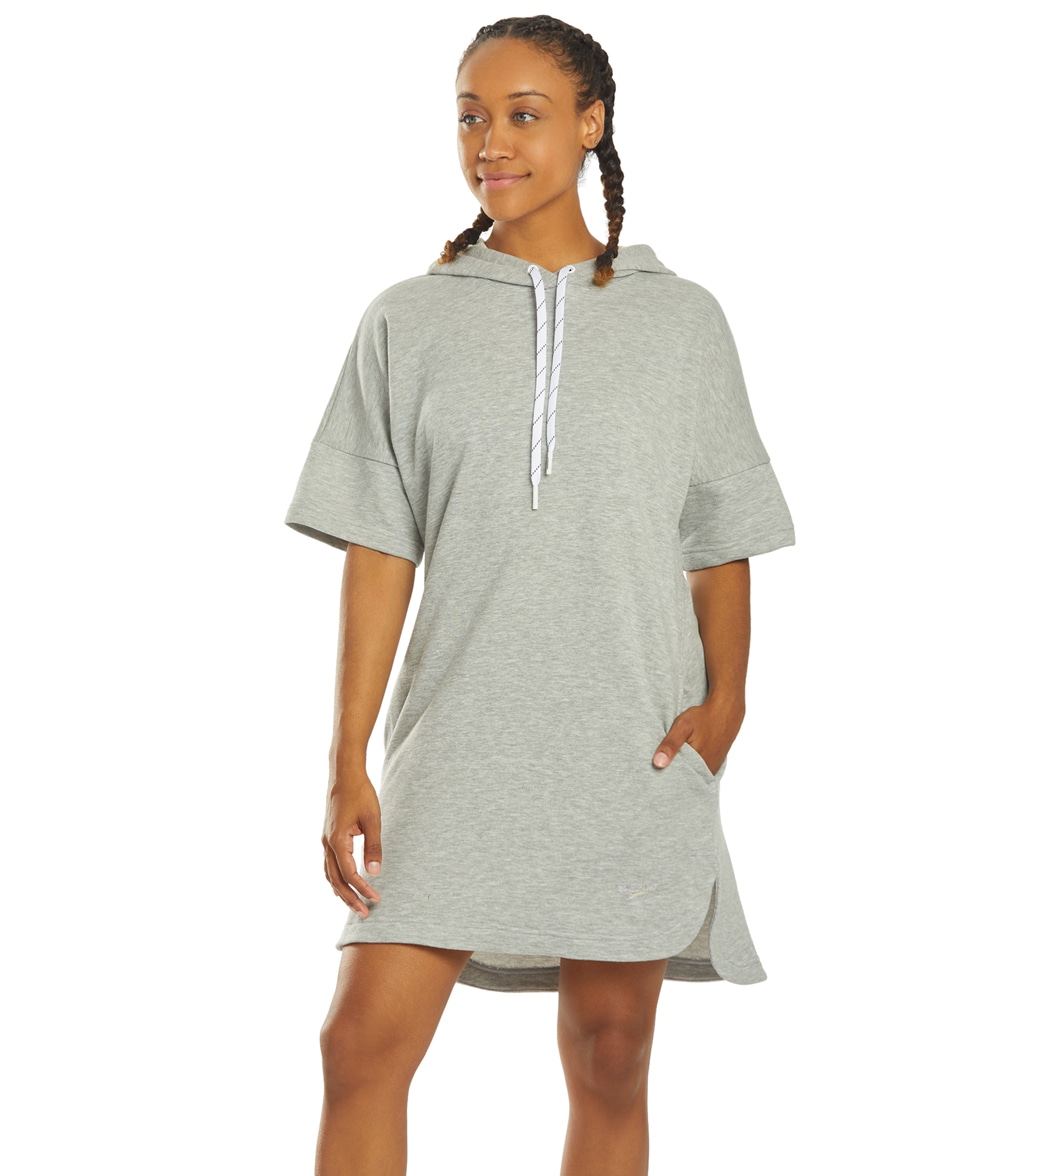 Speedo Active Cover Up Hoodie - Heather Grey Large Cotton/Polyester - Swimoutlet.com